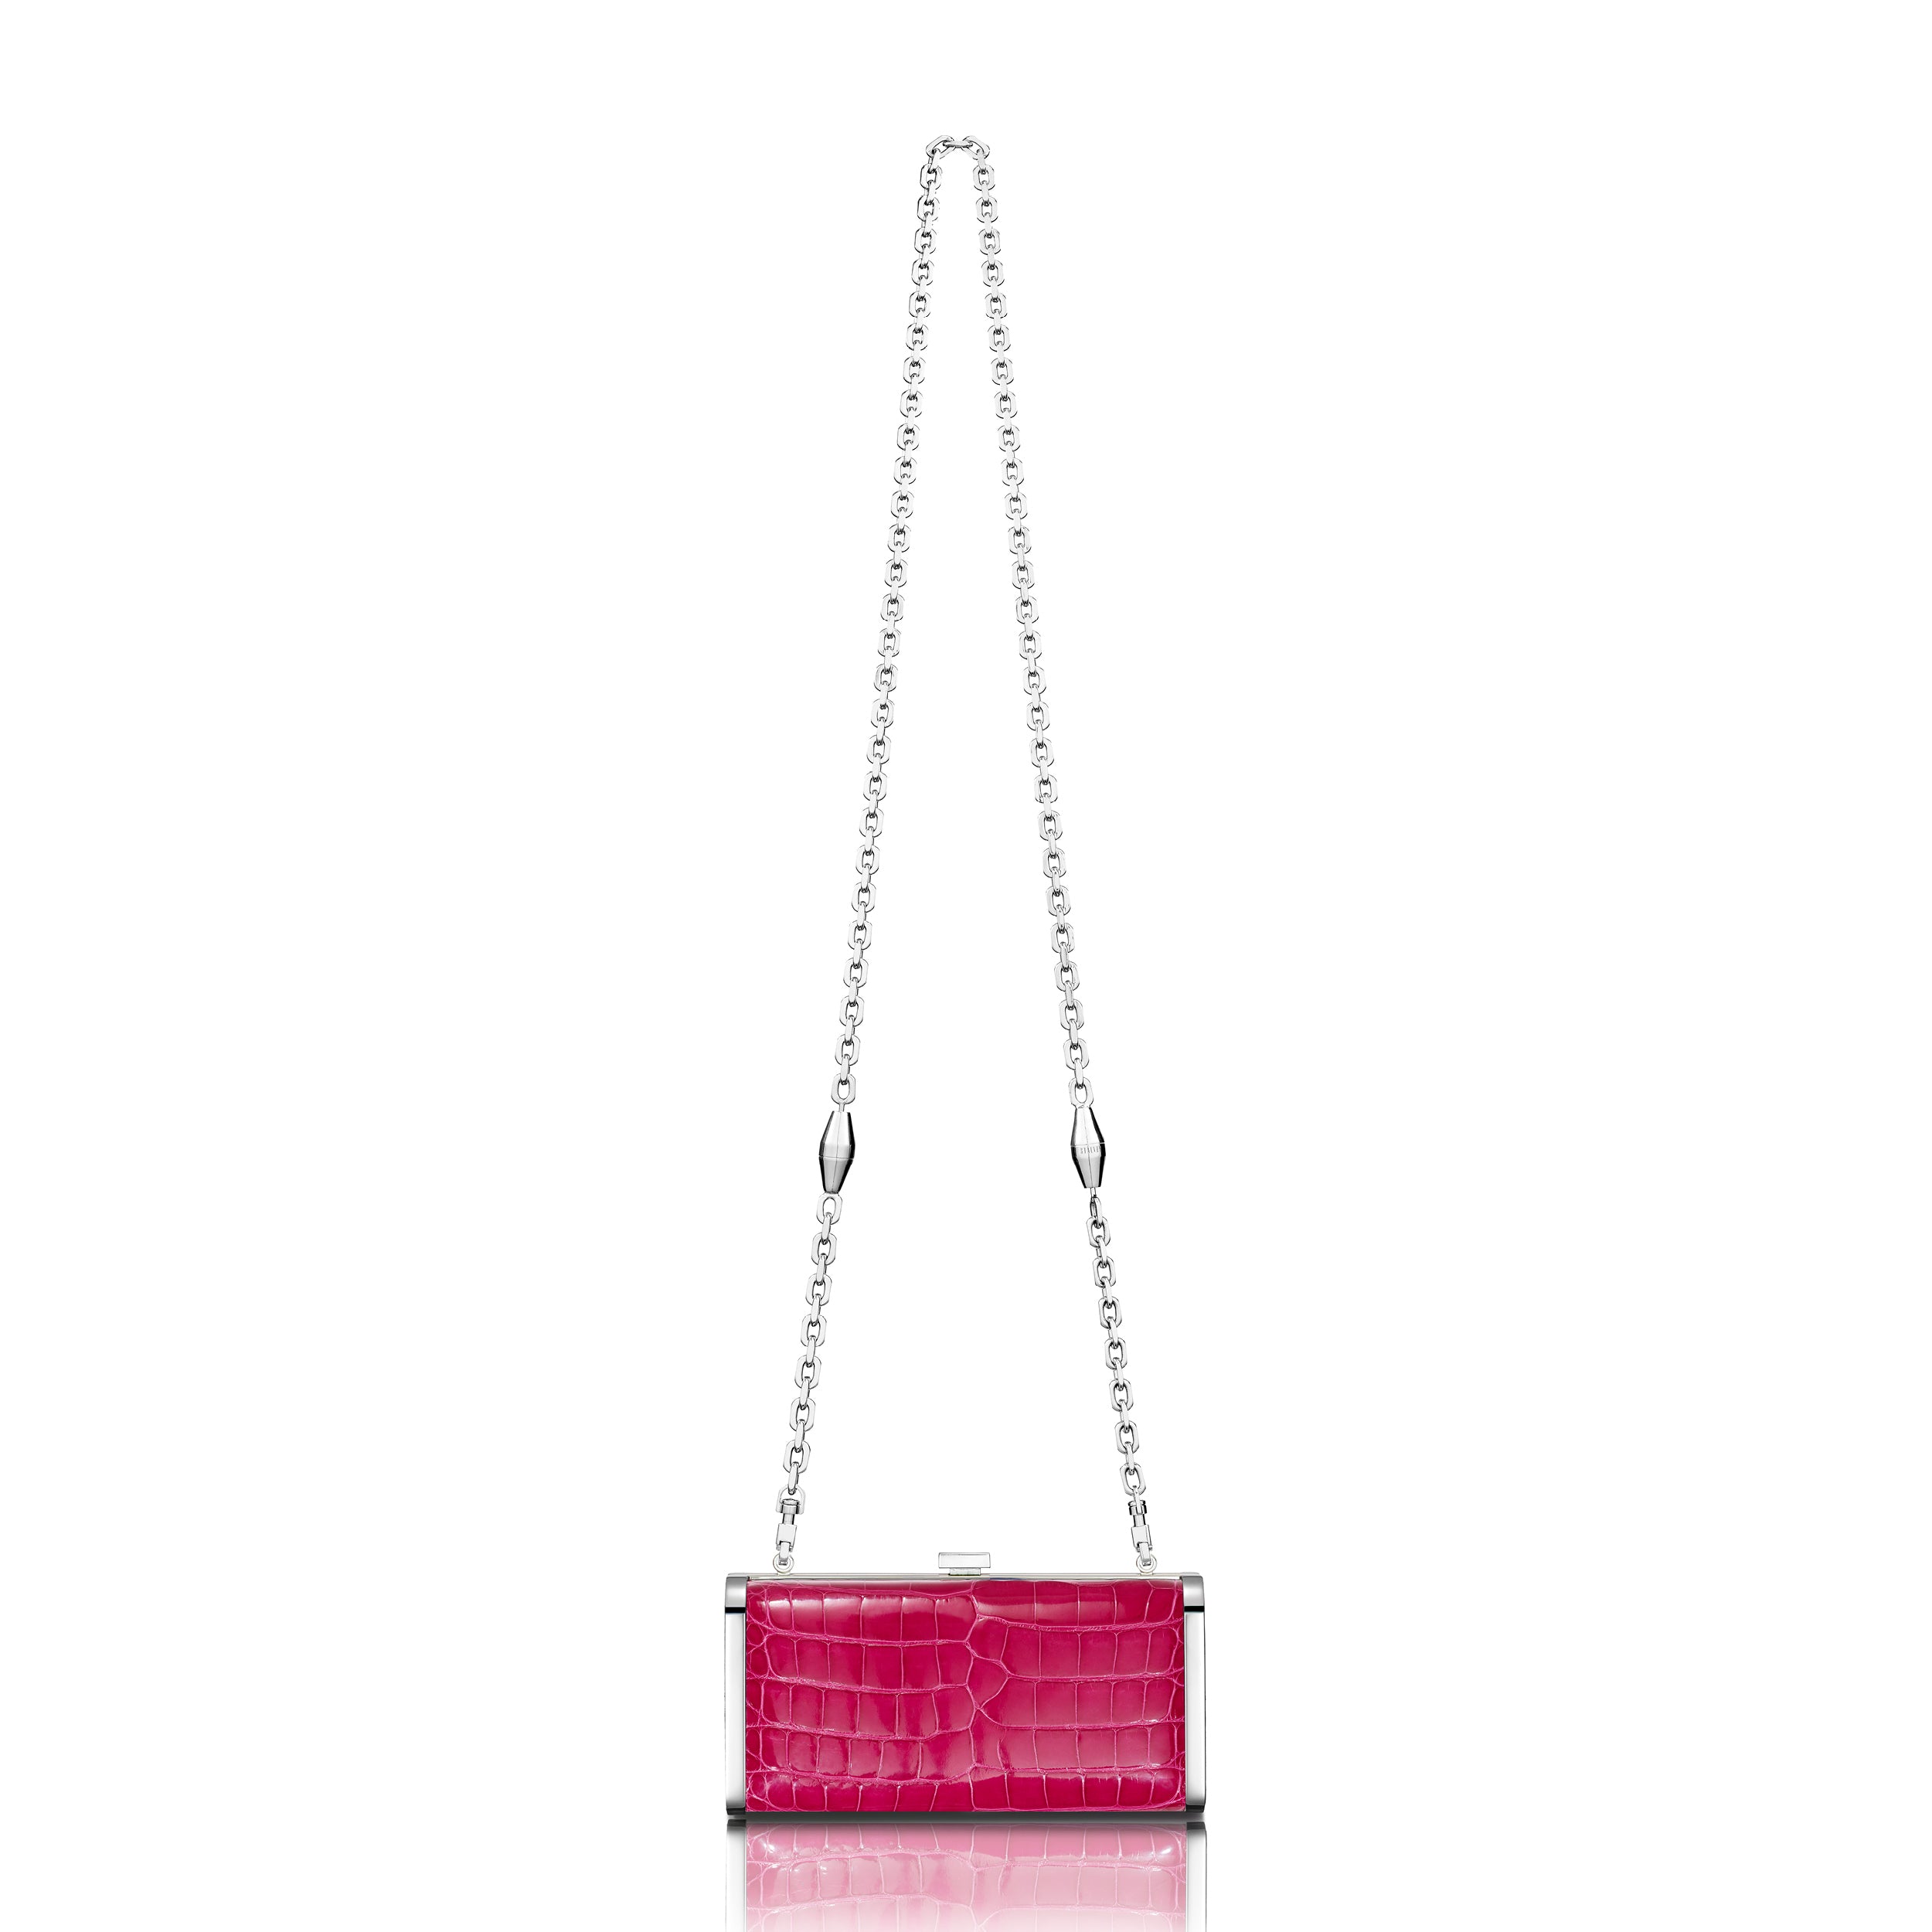 STALVEY Square Clutch in Punch Alligator with Palladium Hardware Back View with Chain